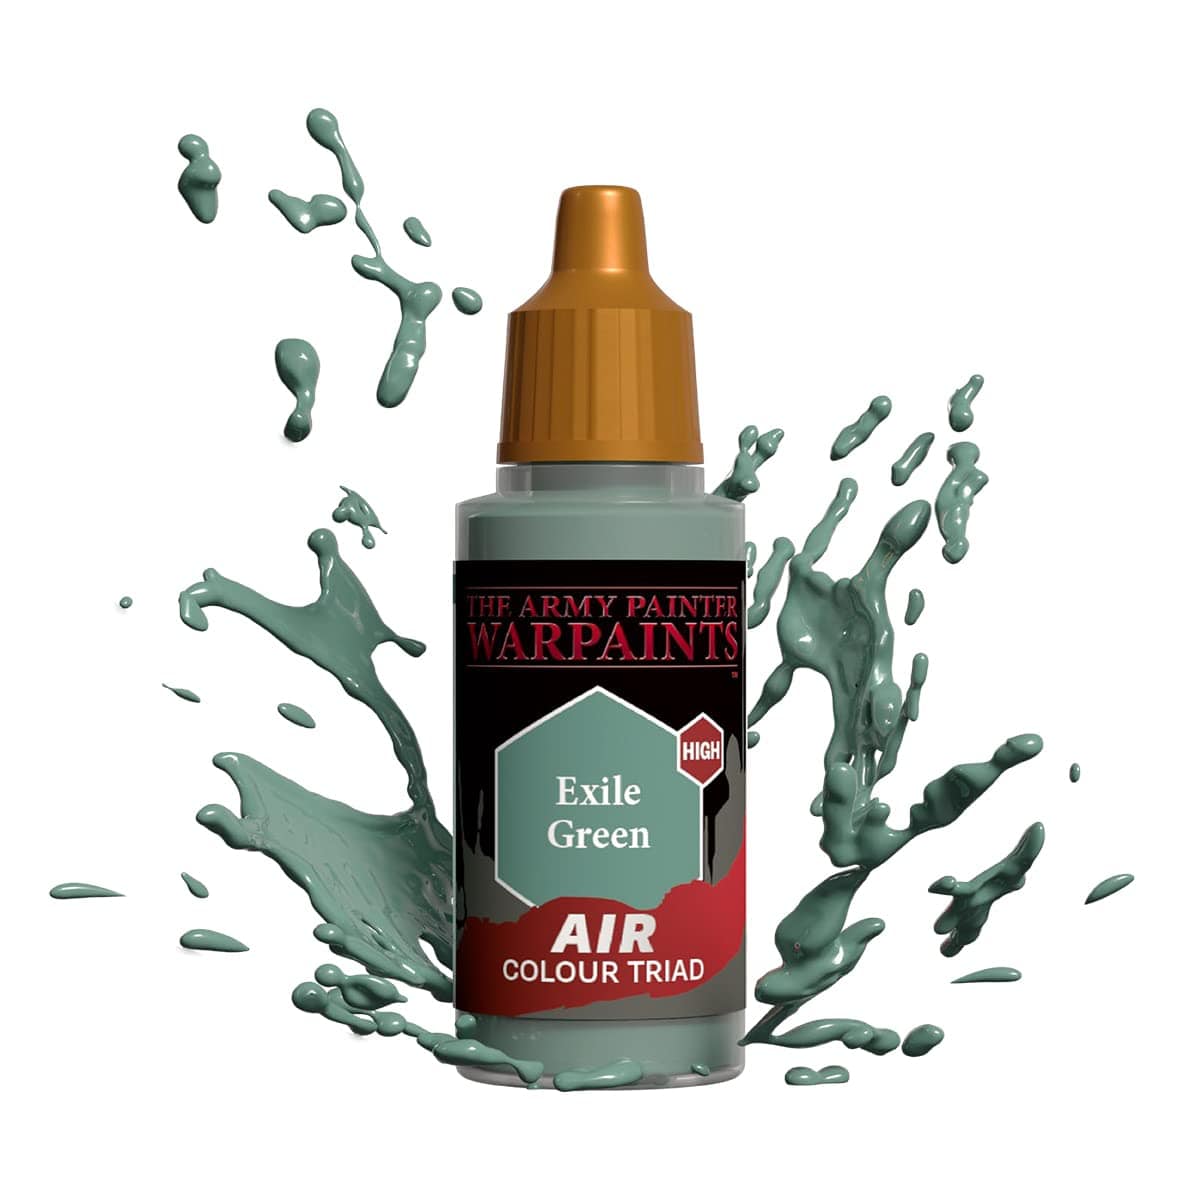 The Army Painter Accessories The Army Painter Warpaints Air: Exile Green 18ml